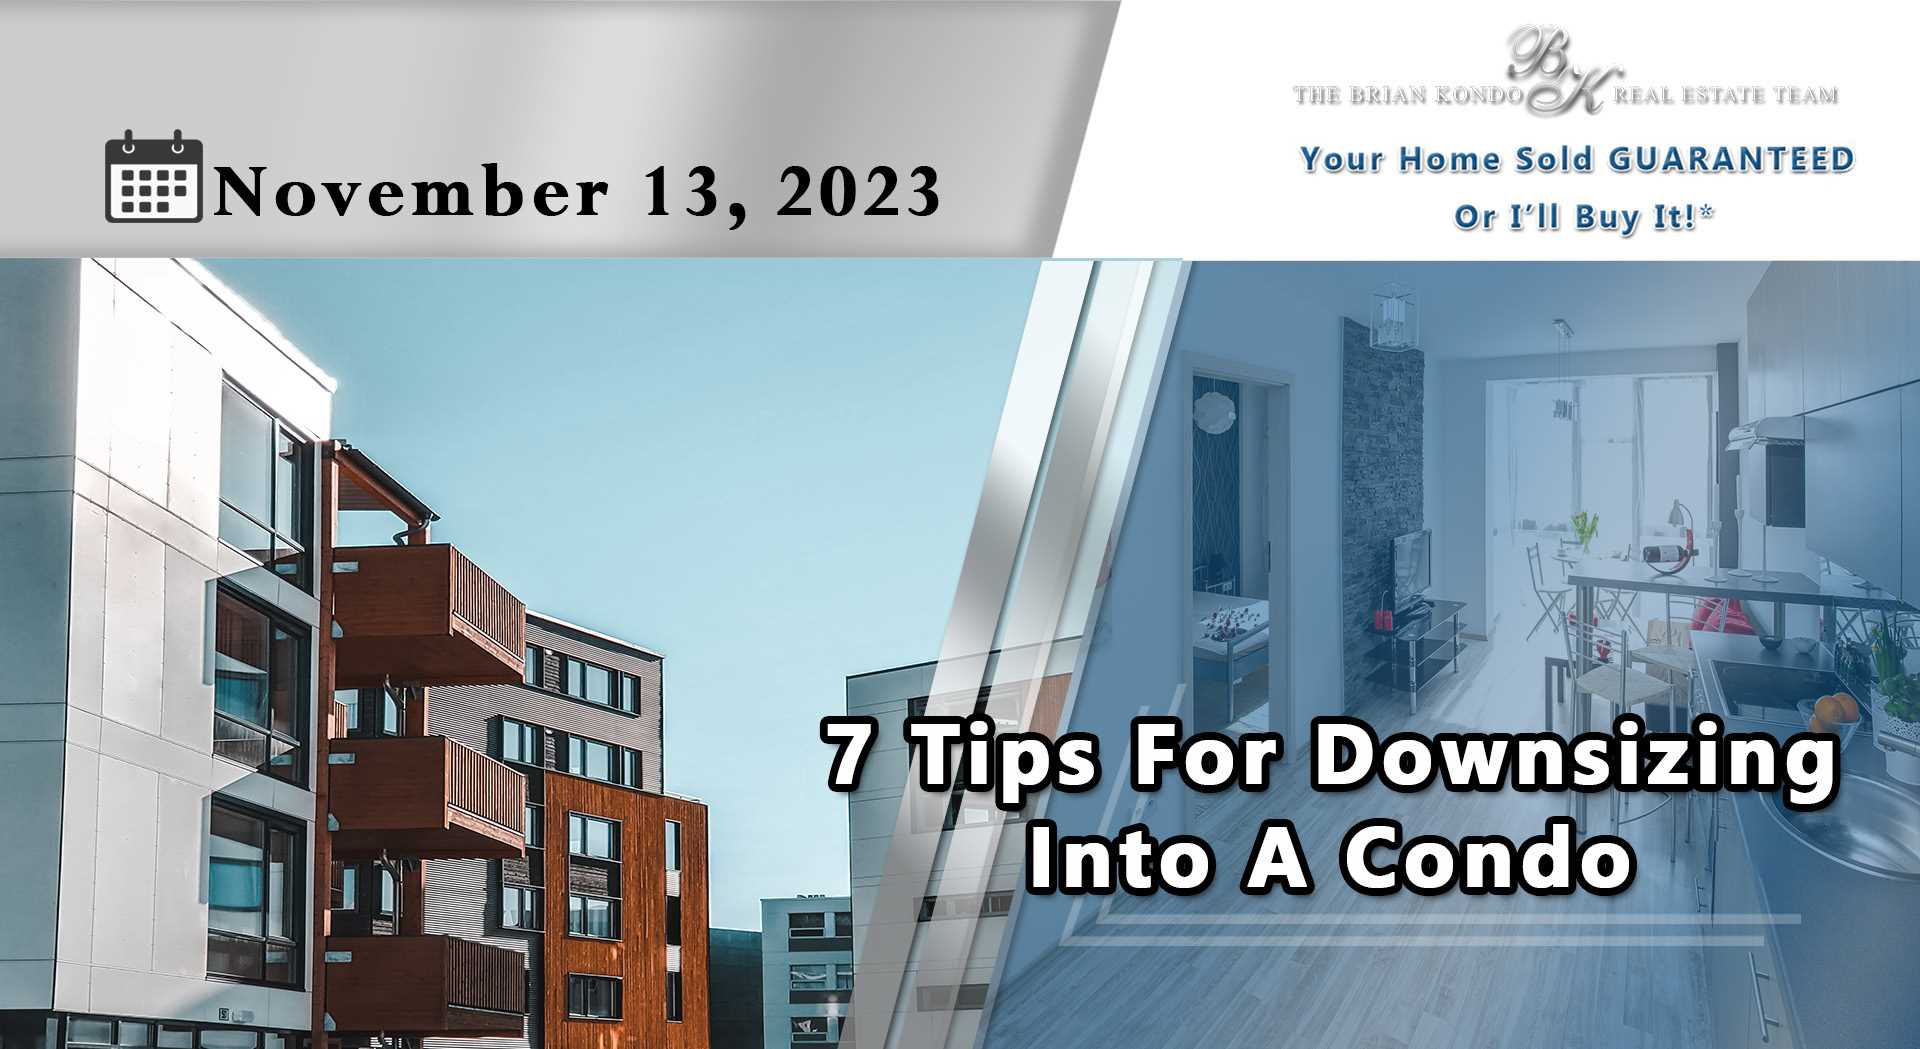 7 Tips For Downsizing Into A Condo